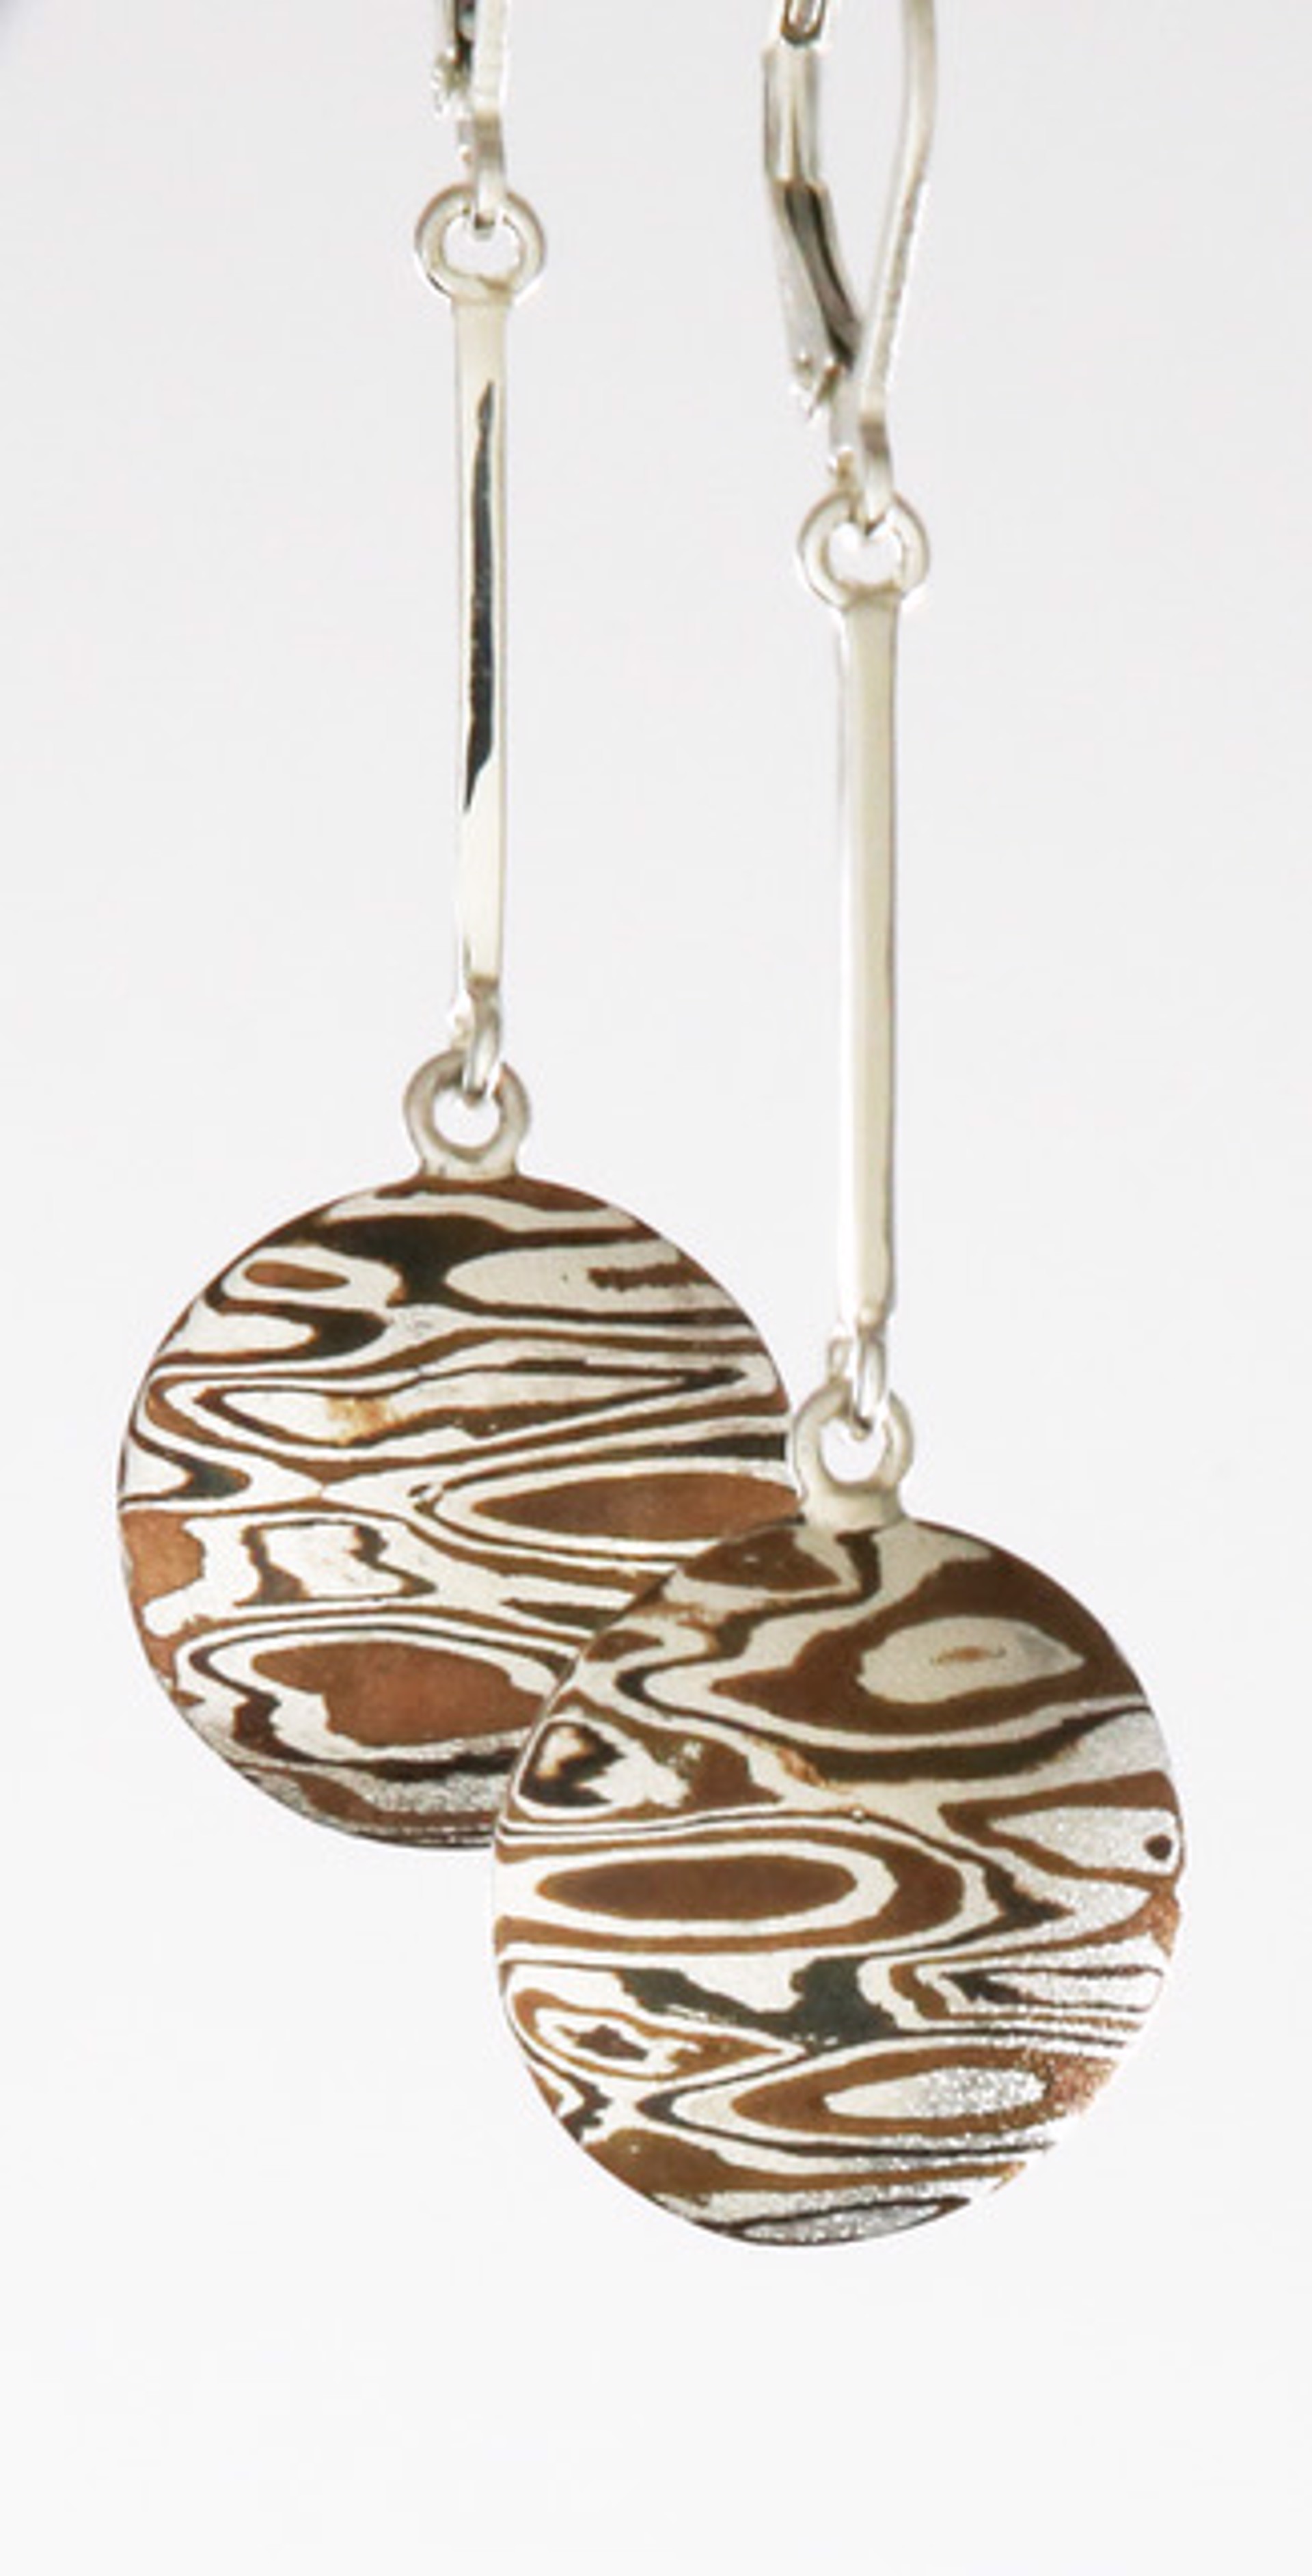 Earrings - Mokume Gane With Sterling Silver - #443 by Ken and Barbara Newman